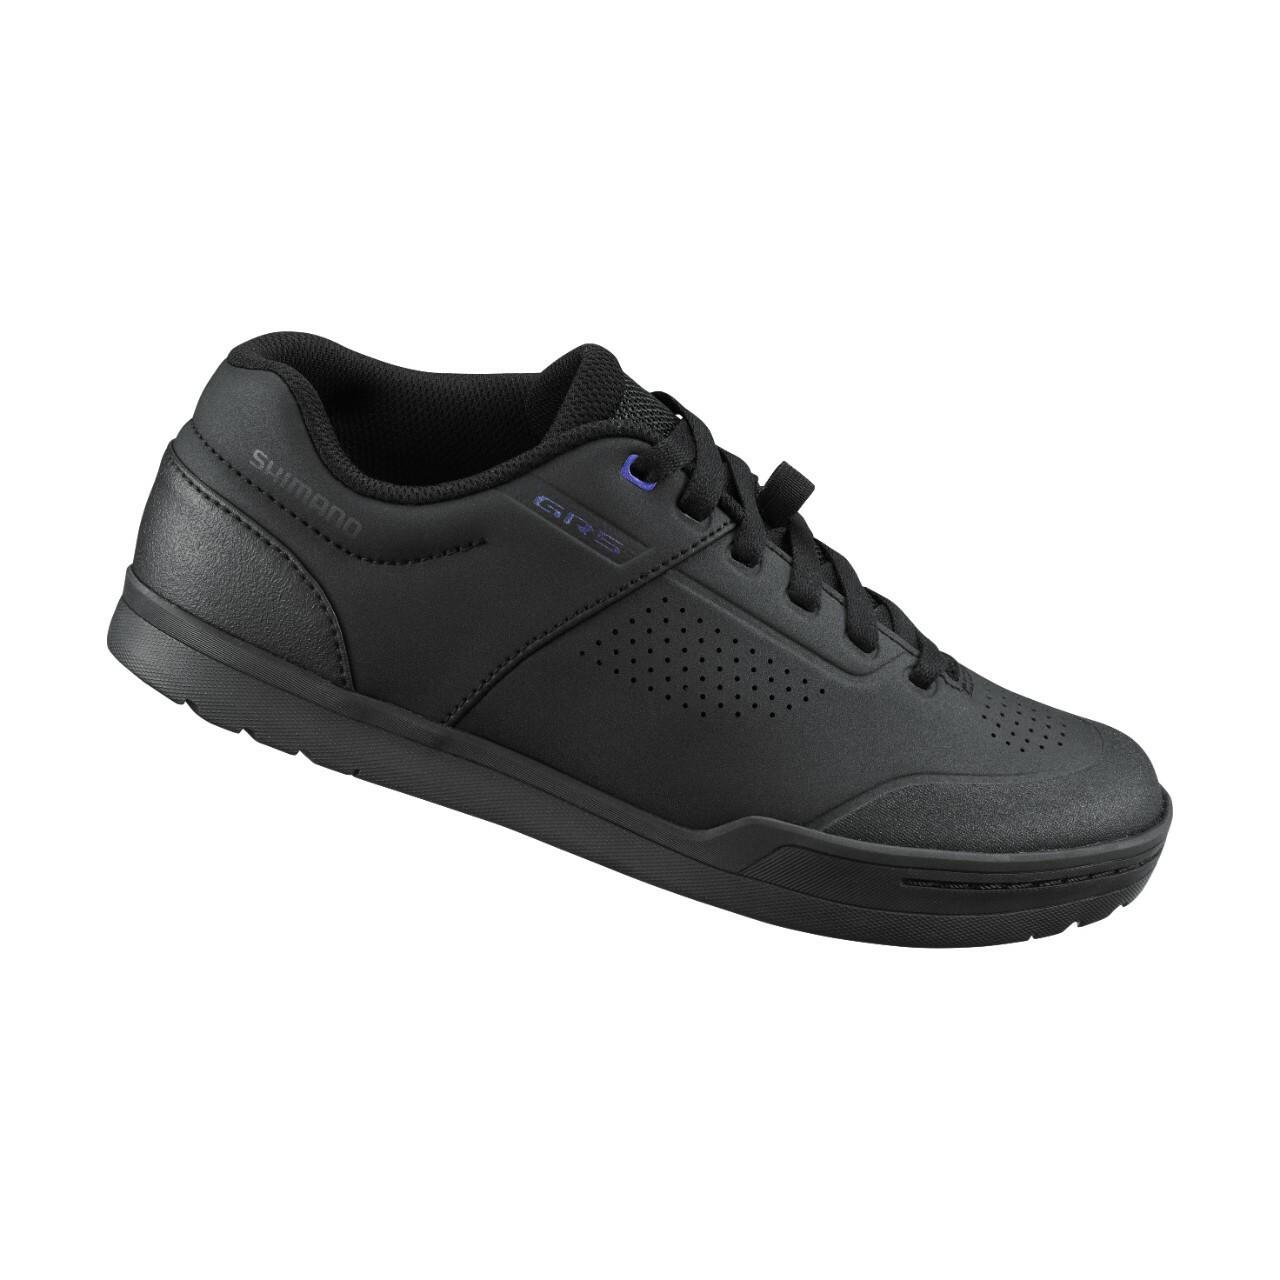 SHIMANO  Chaussures femme  SH-GR501 